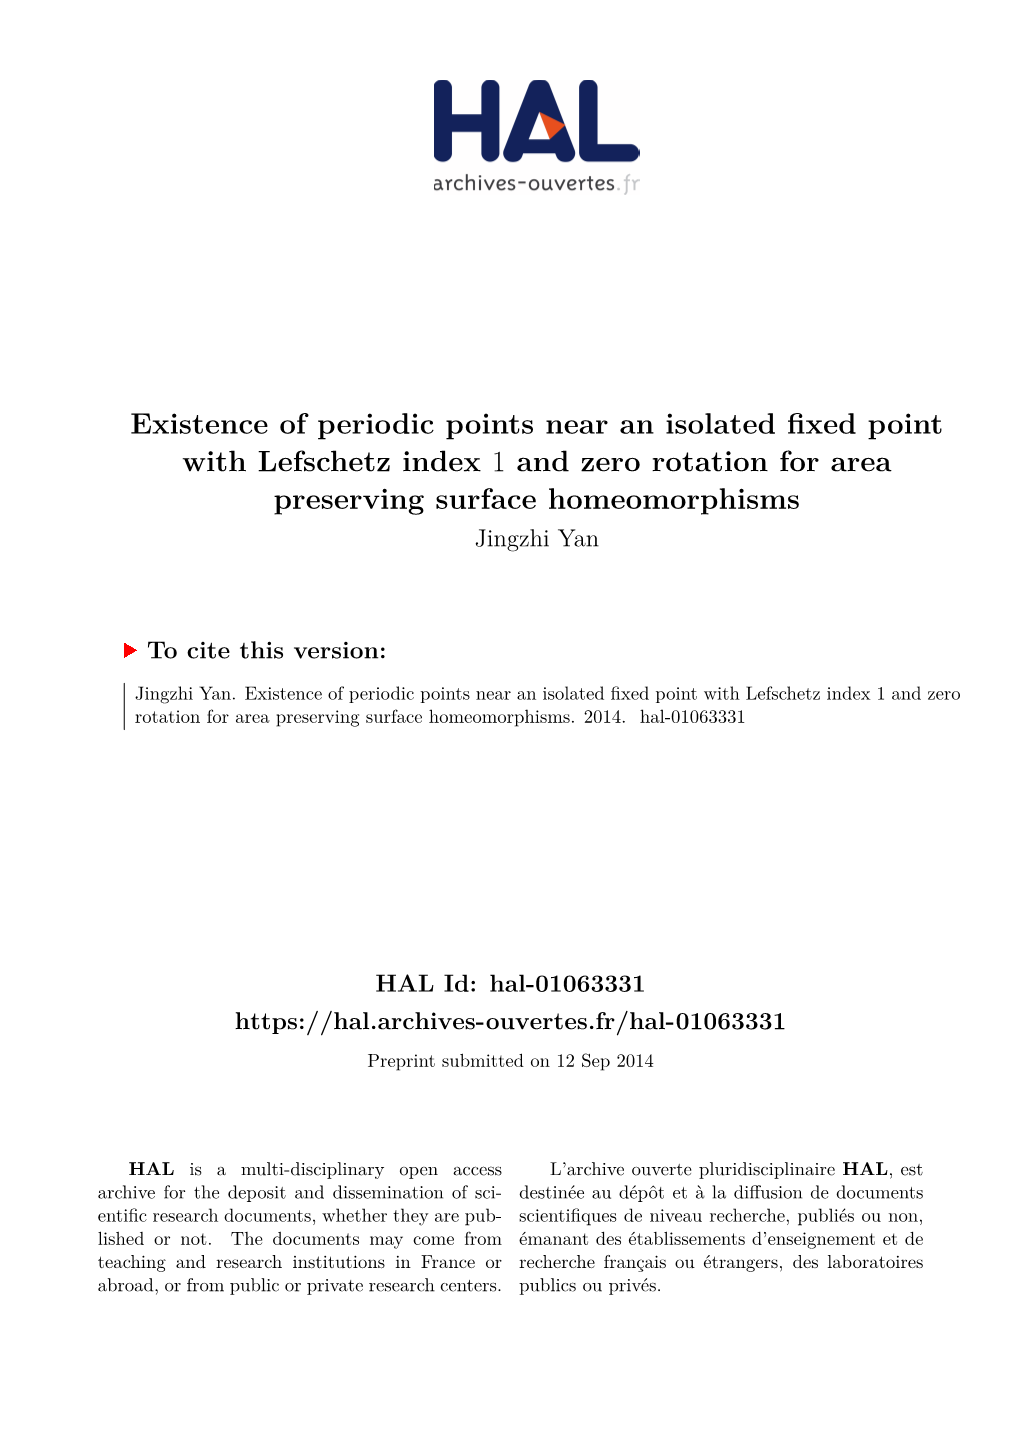 Existence of Periodic Points Near an Isolated Fixed Point with Lefschetz Index 1 and Zero Rotation for Area Preserving Surface Homeomorphisms Jingzhi Yan